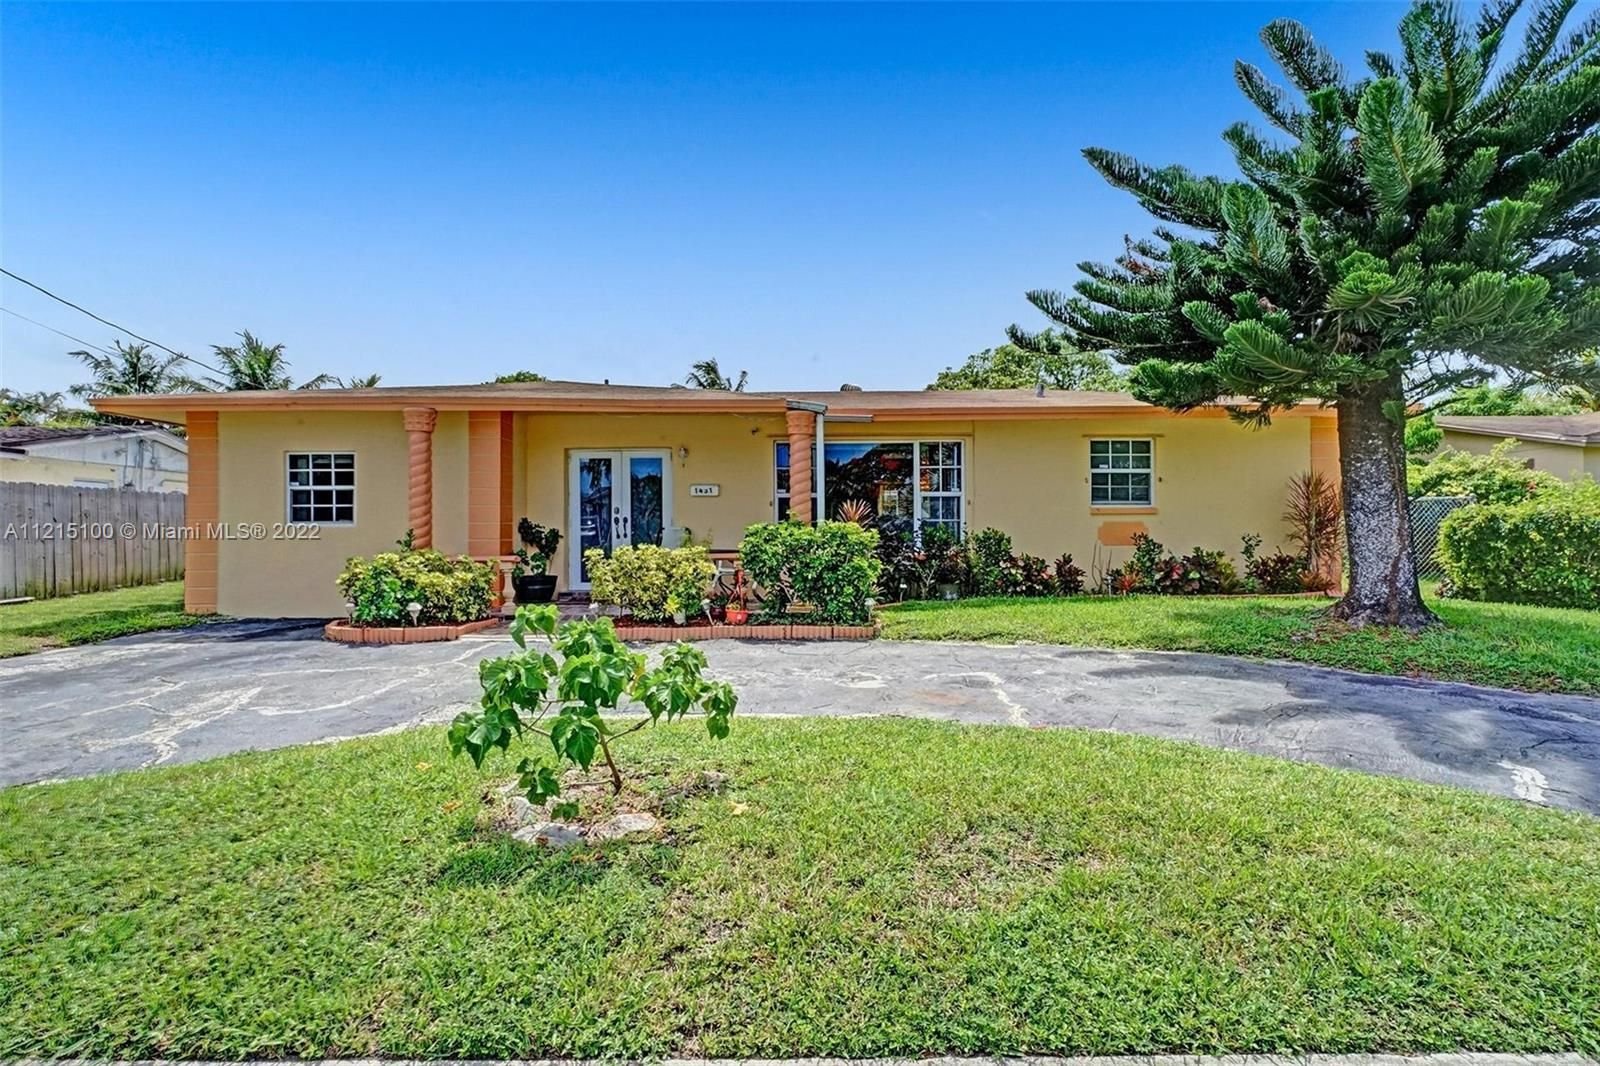 Real estate property located at 1431 55th Ave, Broward County, Lauderhill, FL